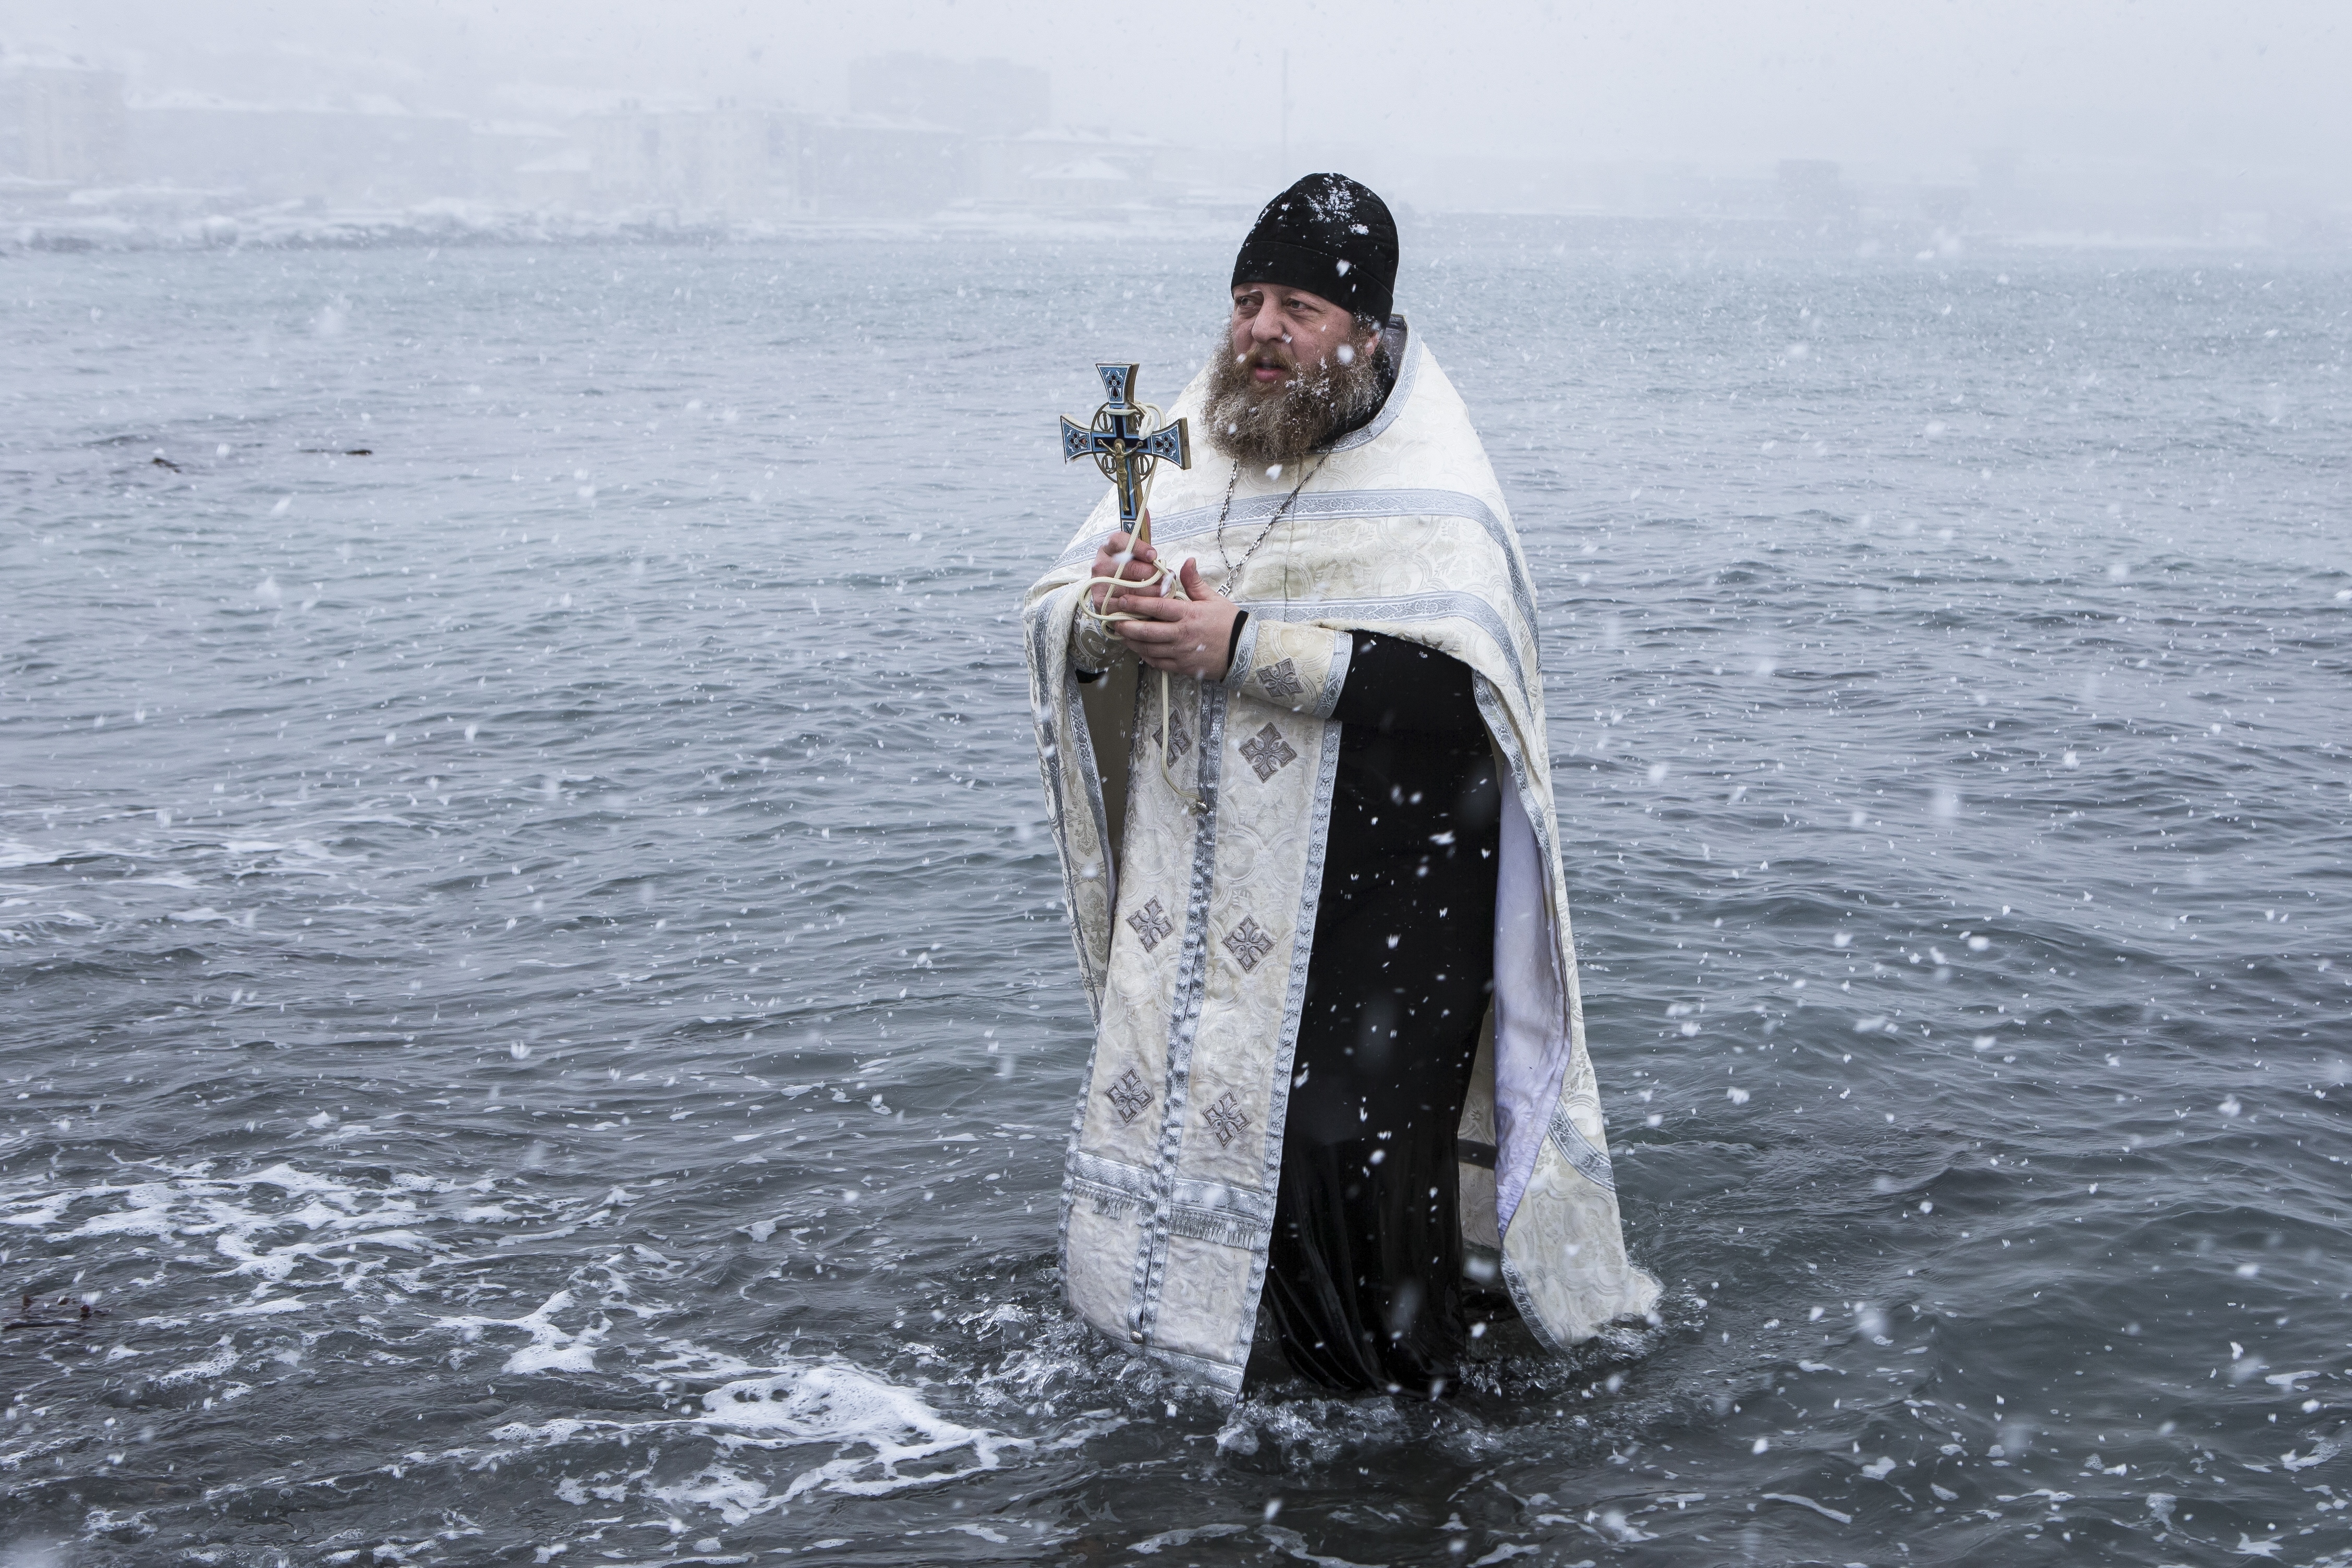 Russian monk Sergius blesses sea water before bathing on Epiphany in Kholmsk, 90 kilometers (56 miles ) west of Yuzhno-Sakhalinsk, Sakhalin Island in Russia's Far East. Water that is blessed by a cleric on Epiphany is considered holy and pure until next year's celebration, and is believed to have special powers of protection and healing. (AP Photo/Sergey Krasnoukhov)